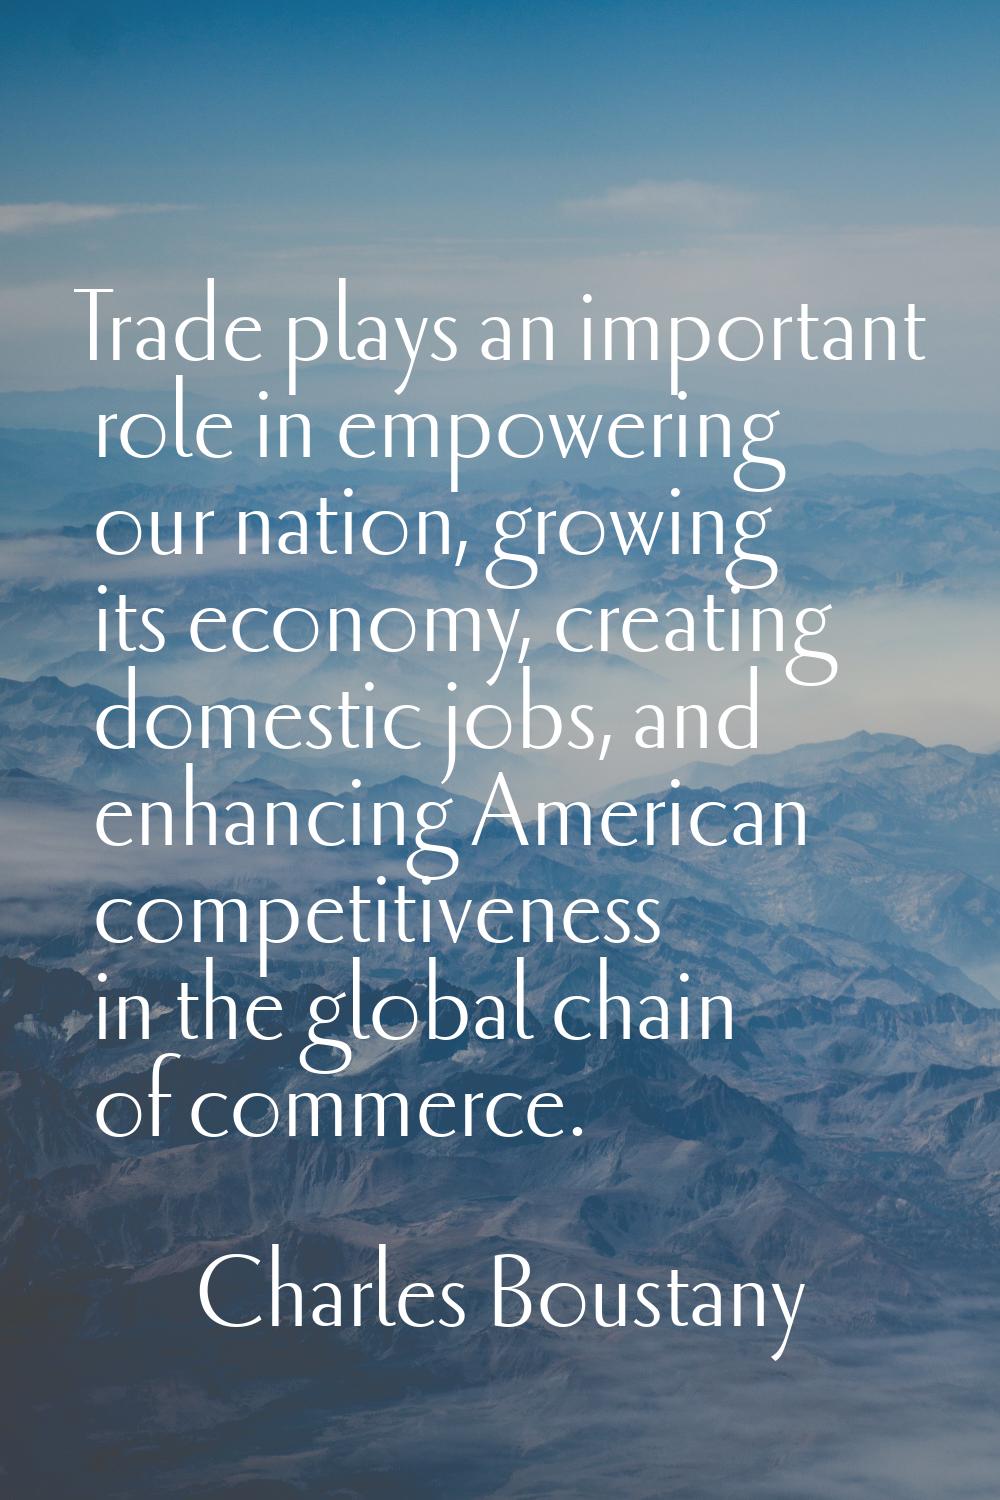 Trade plays an important role in empowering our nation, growing its economy, creating domestic jobs